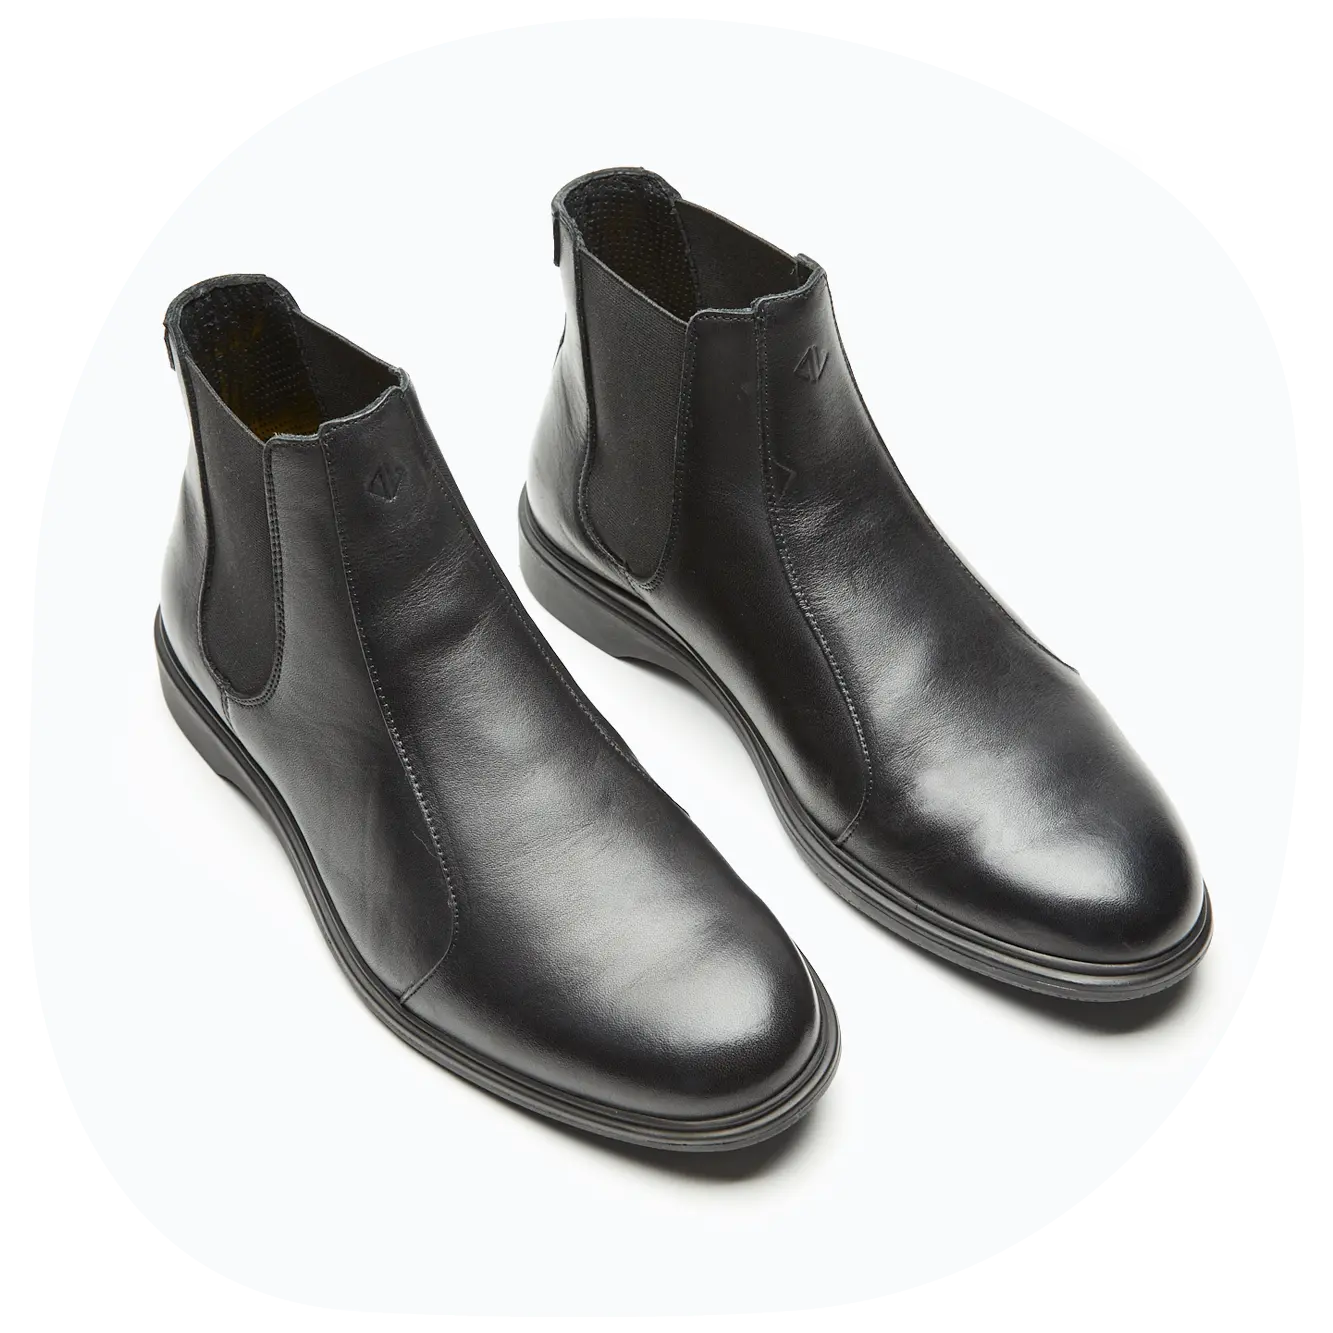 The Obsidian Chelsea men’s boots from Amberjack